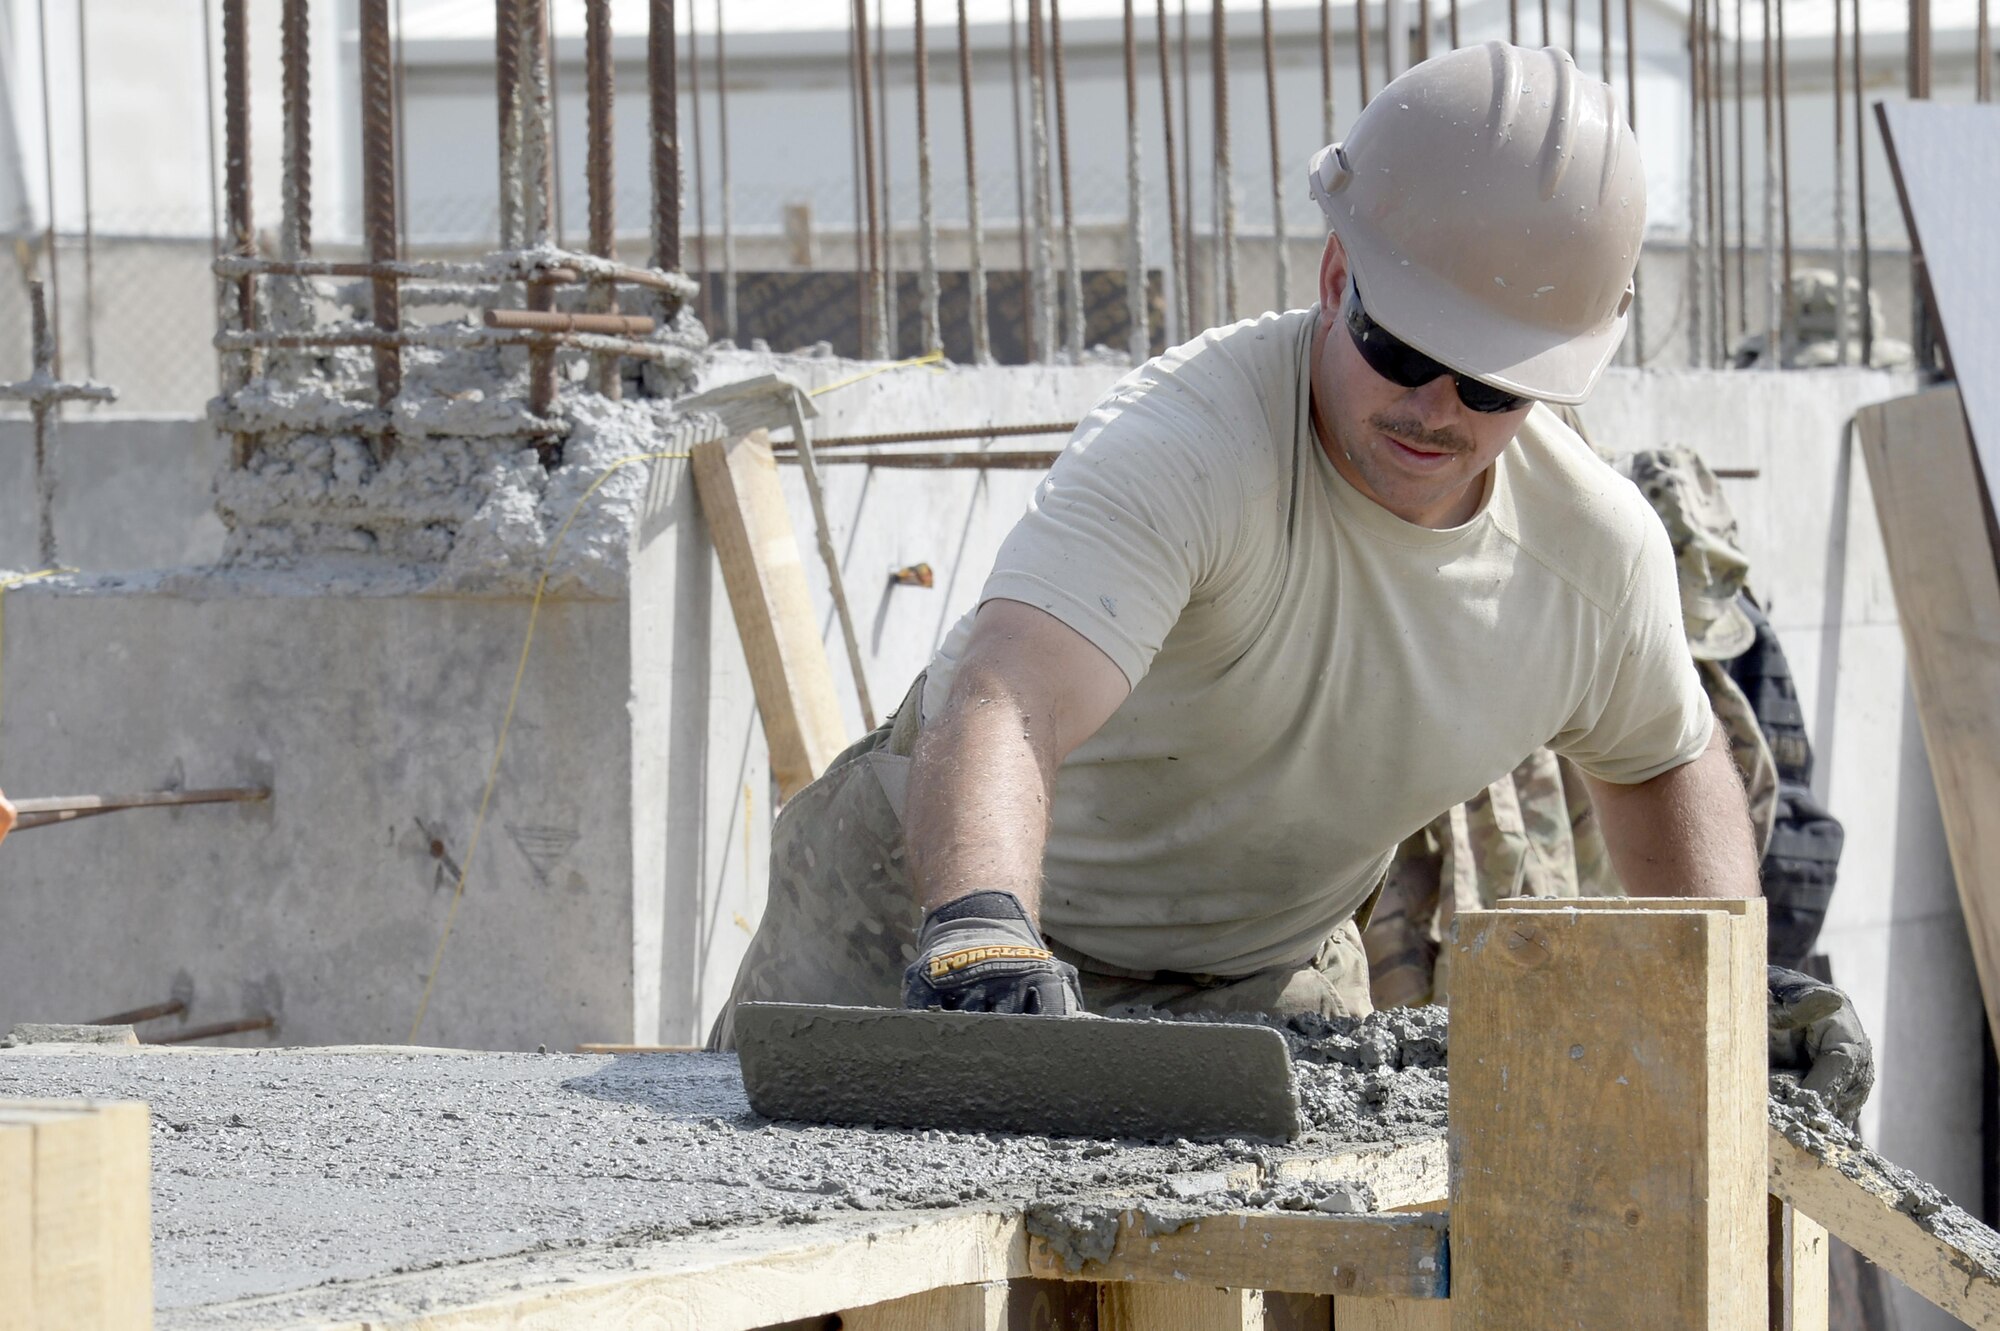 Tech. Sgt. Philip, Expeditionary Prime Base Engineer Emergency Force Squadron water and fuels systems manager, smooth’s out concrete at a construction site at an undisclosed location in Southwest Asia Mar. 4, 2015. Prime BEEF provides installation support by focusing on managing real property, facilities and infrastructure on U.S. or enduring bases in geographic combatant commands outside the U.S. Philip is currently deployed from the 183rd Civil Engineer Squadron out of Abraham Lincoln Capital Airport in Springfield, Ill. (U.S. Air Force photo/Tech. Sgt. Marie Brown) (RELEASED)